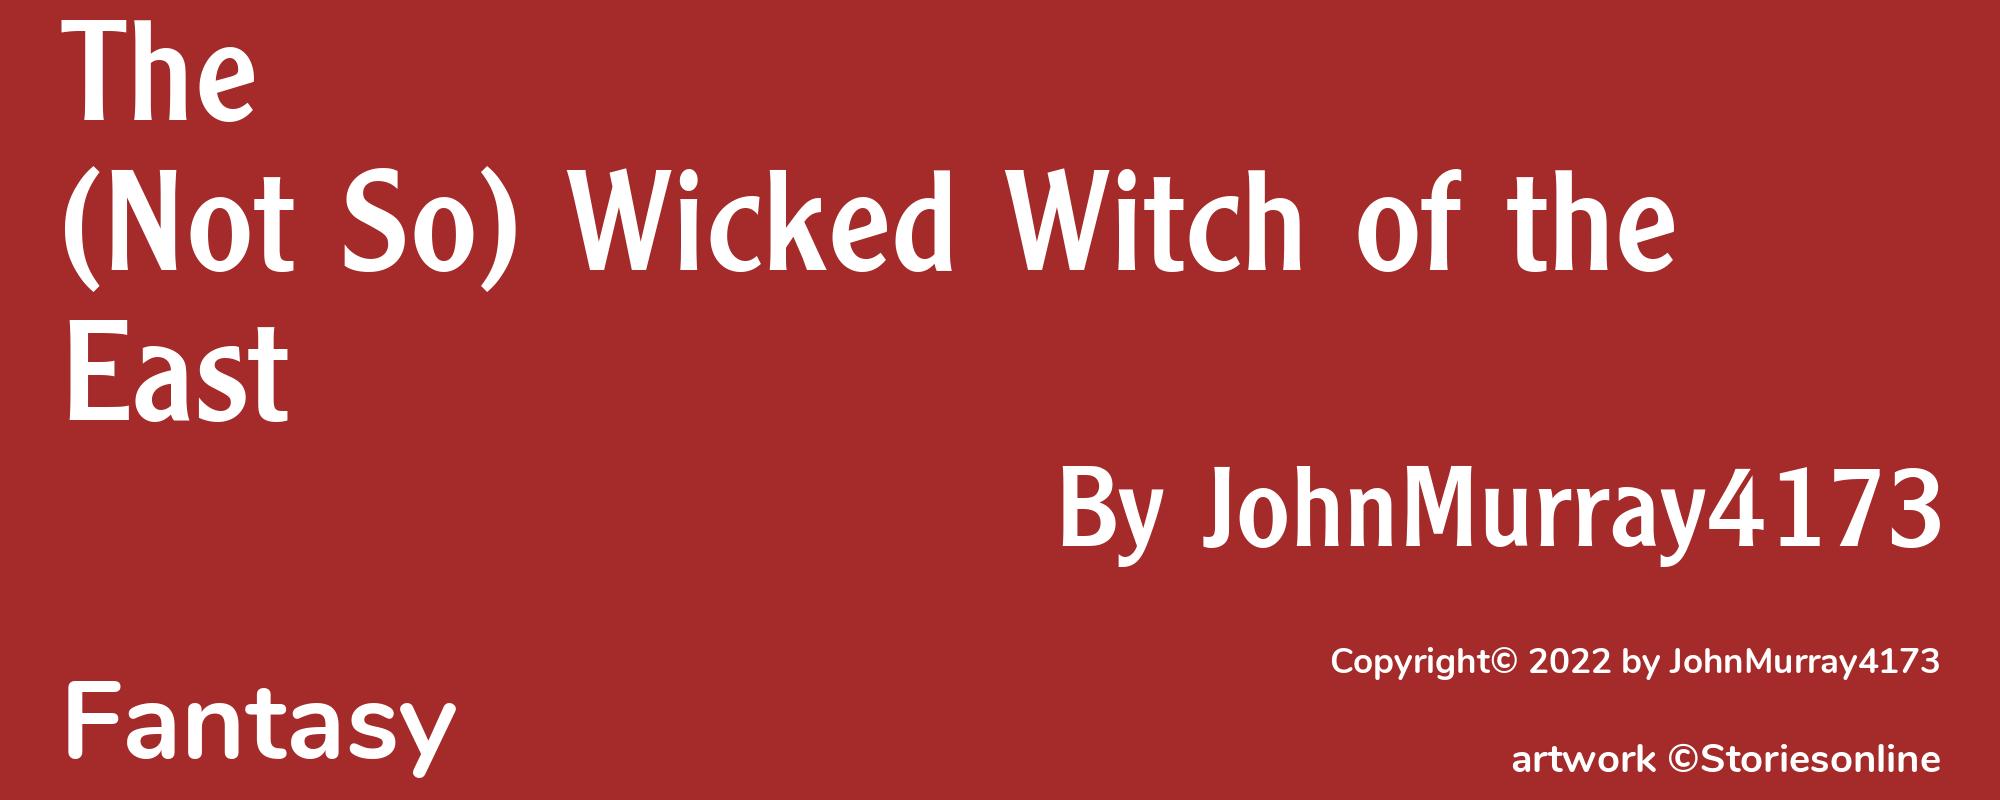 The (Not So) Wicked Witch of the East - Cover